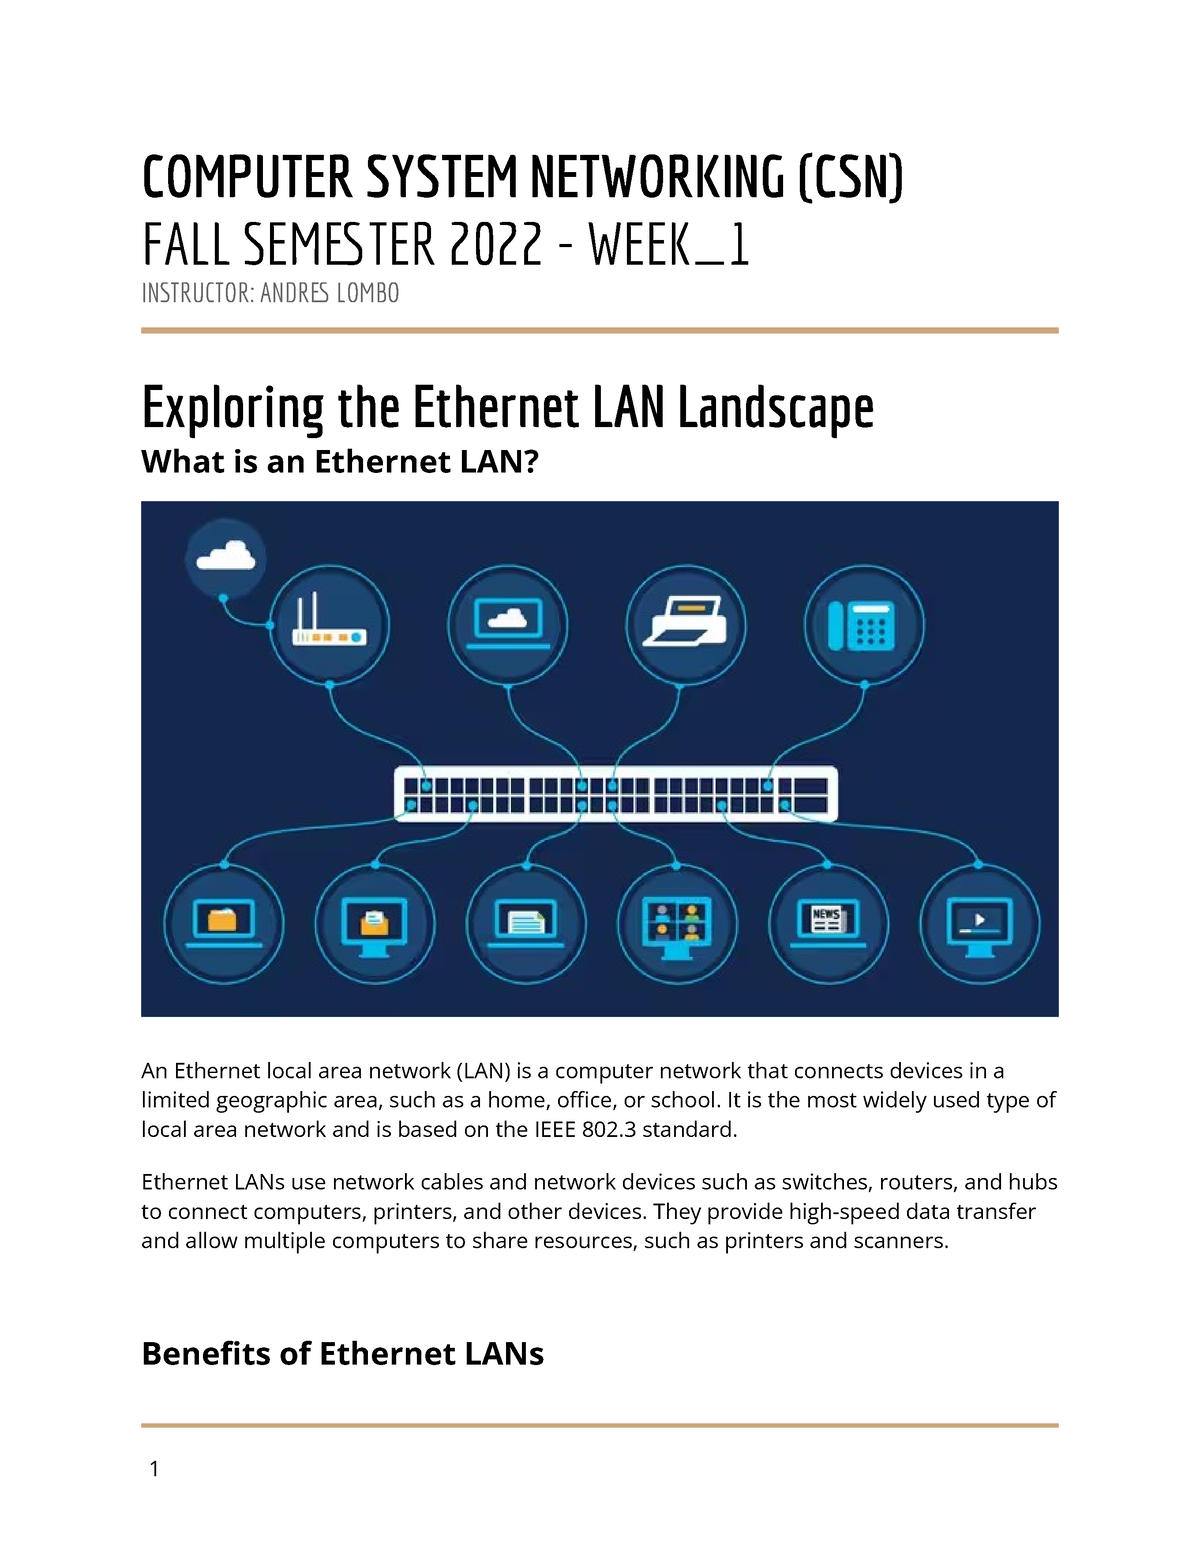 Exploring the LAN landscape COMPUTER SYSTEM NETWORKING (CSN